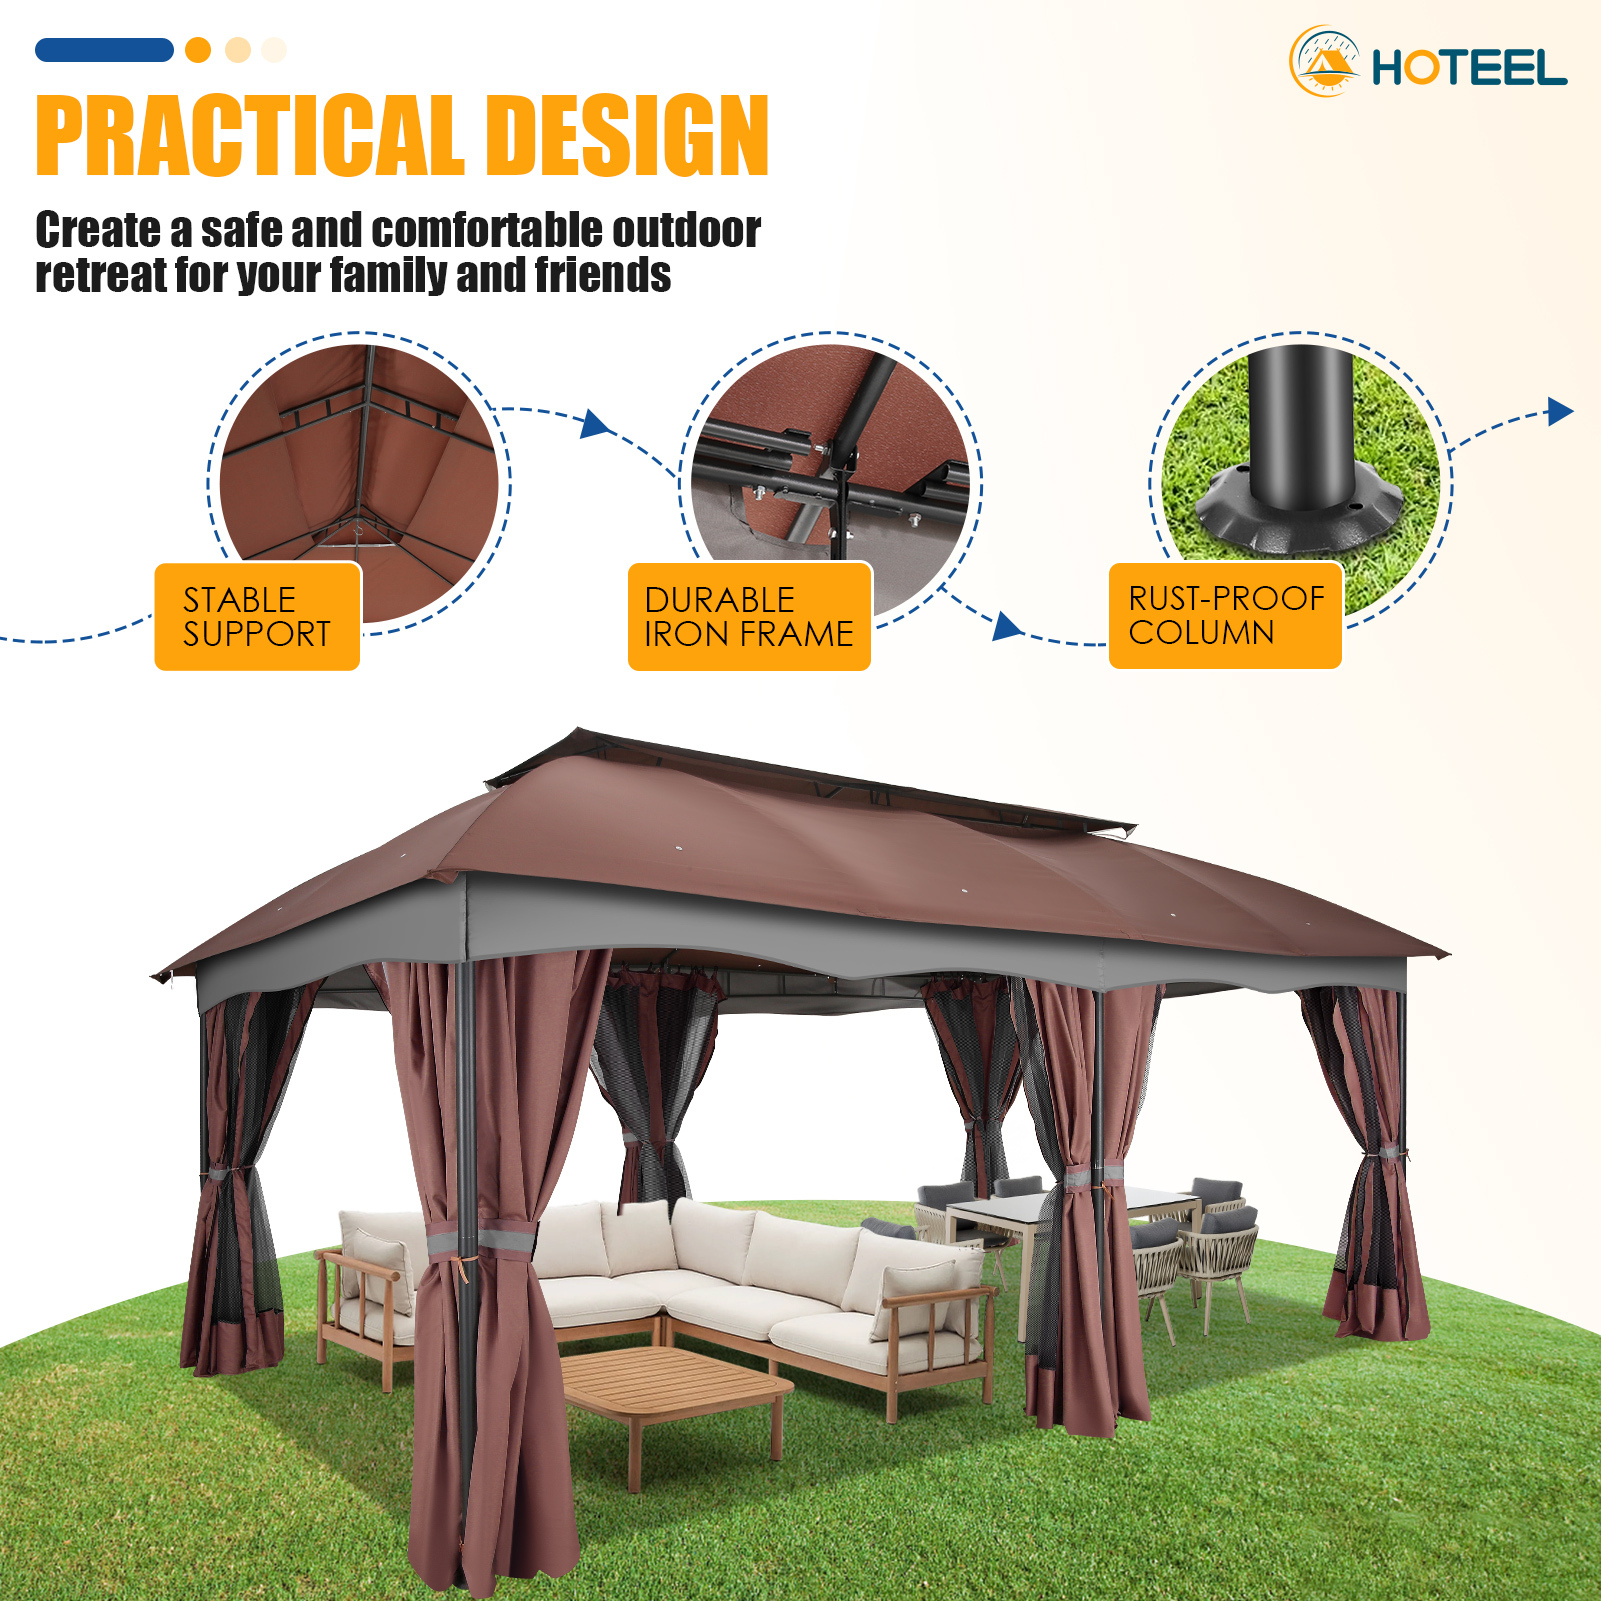 COBIZI 12X20 Heavy Duty Gazebo Outdoor Gazebo with Mosquito Netting and Curtains, Canopy Tent Deck Gazebo with Double-Arc Roof Ventiation and Metal Steel Frame Suitable for Lawn, Backyard, Patio - image 3 of 11